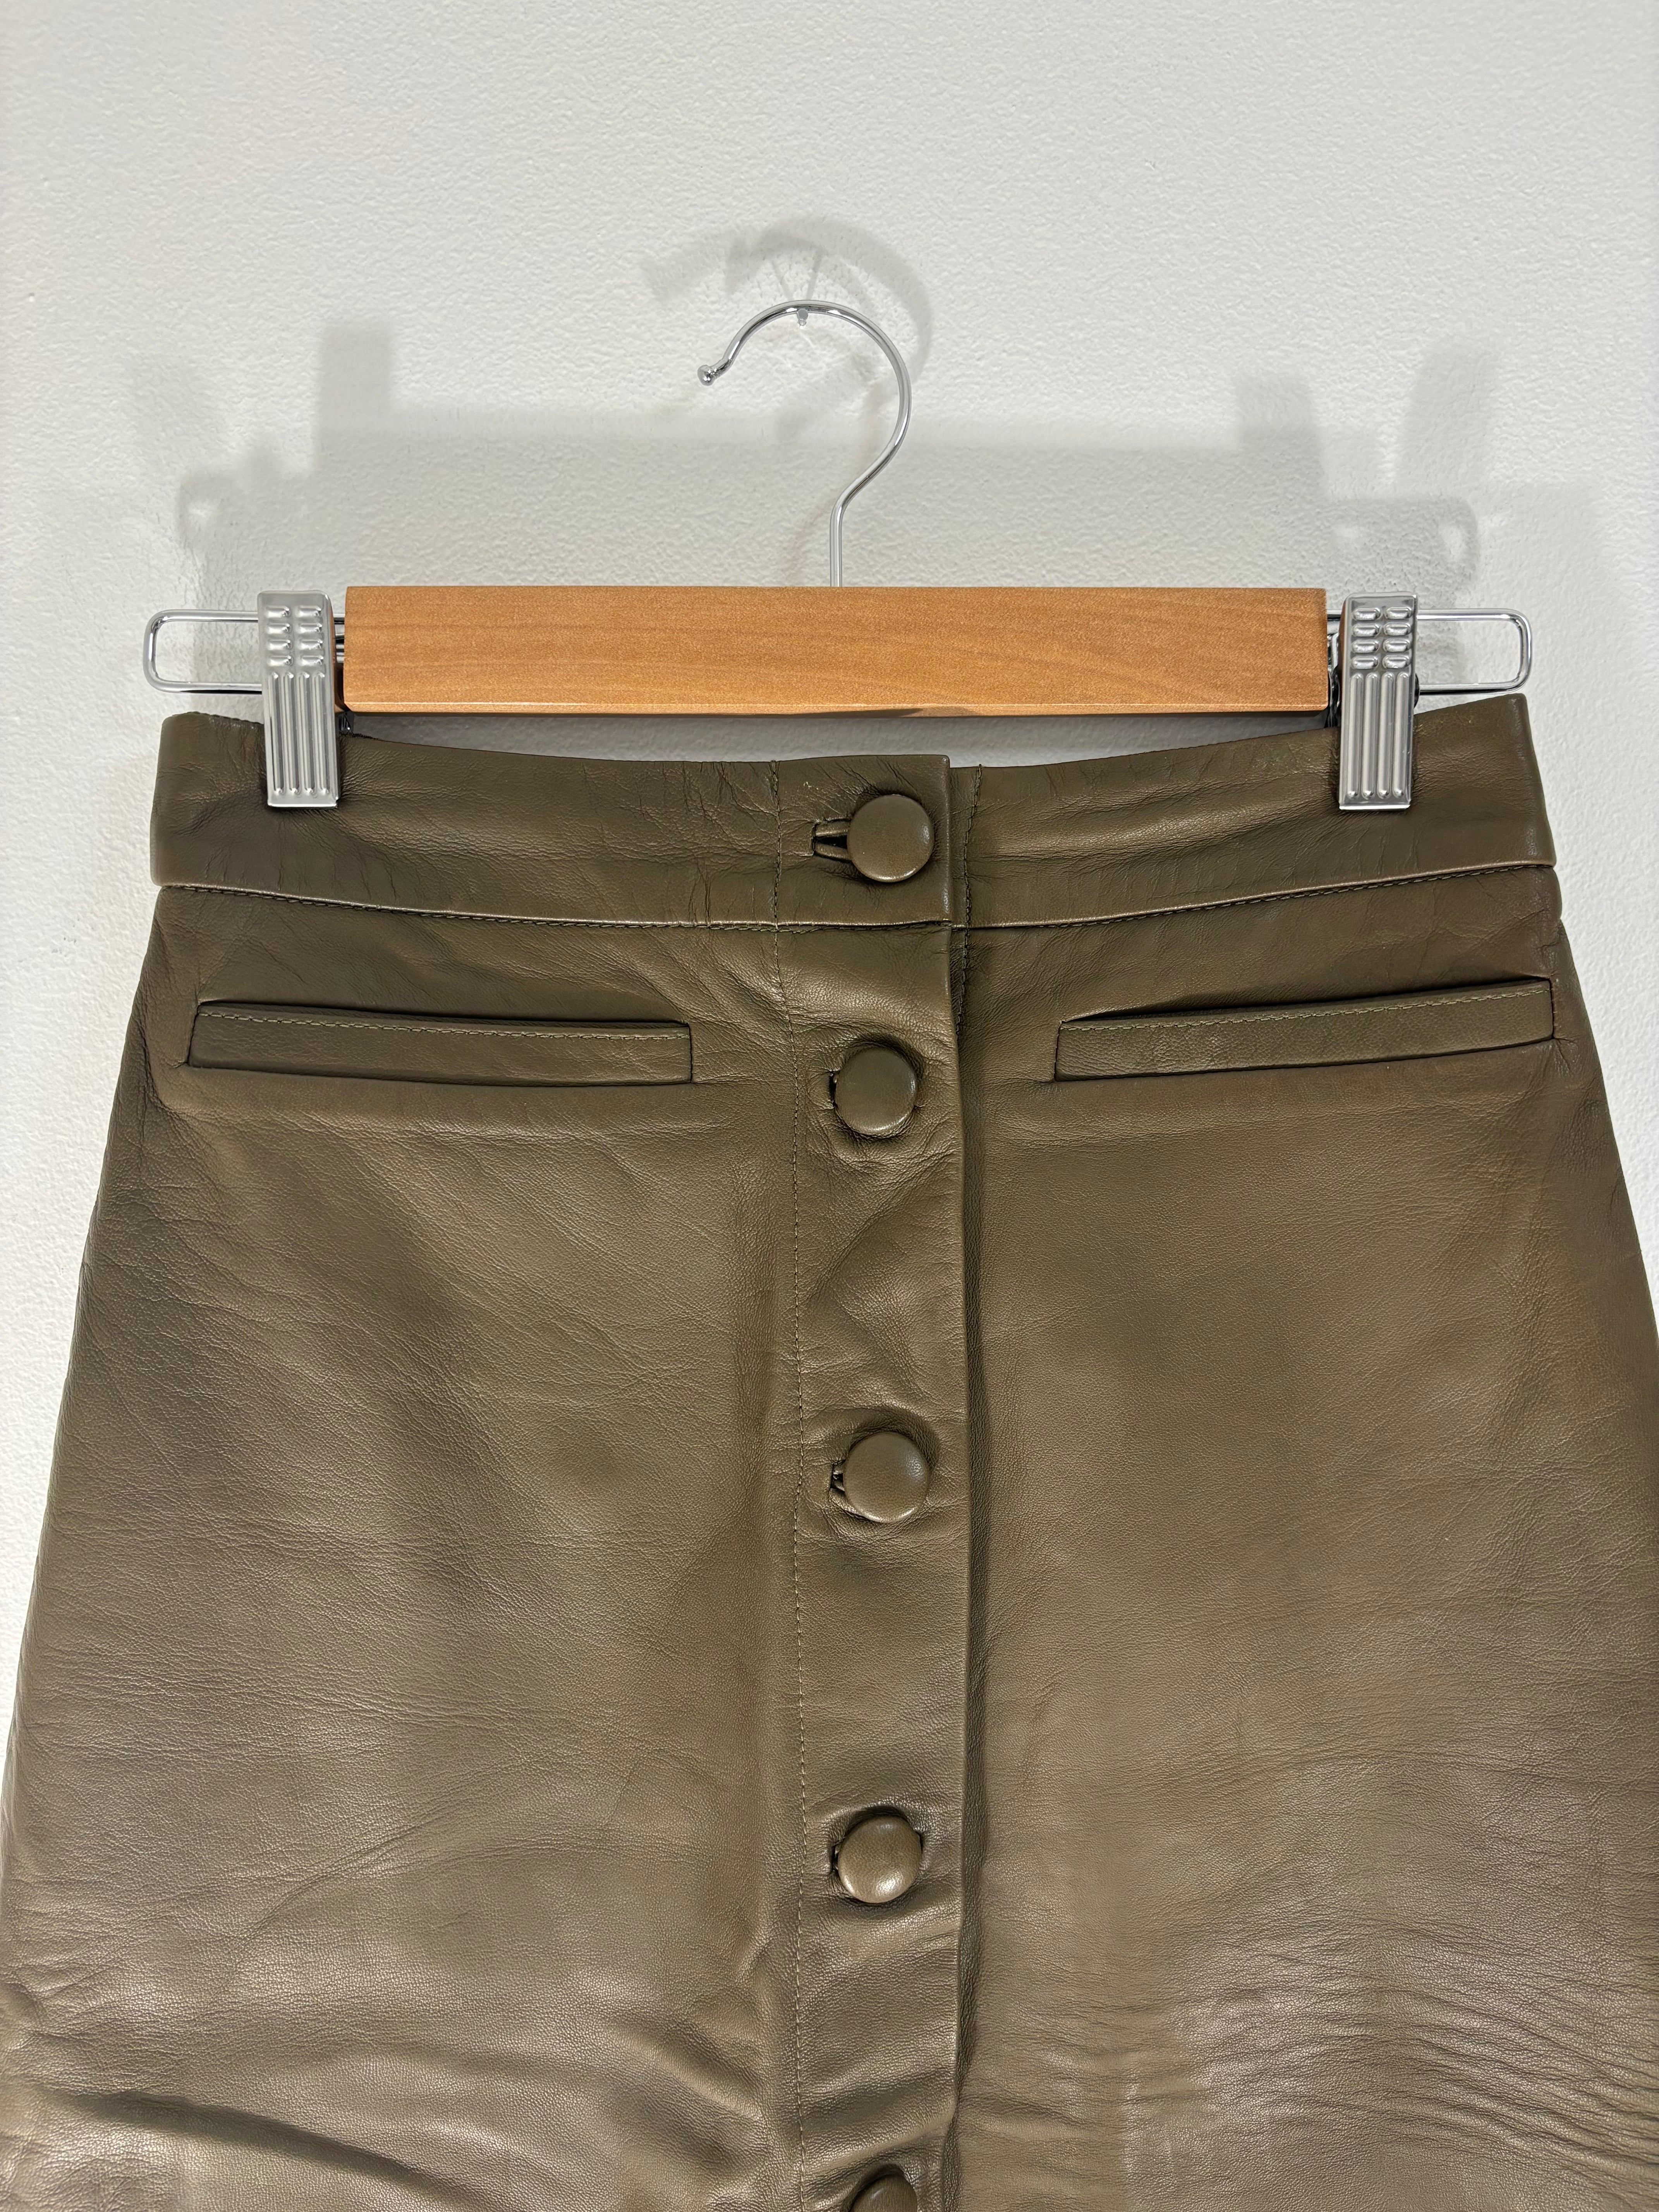 Ted Baker leather skirt - XS